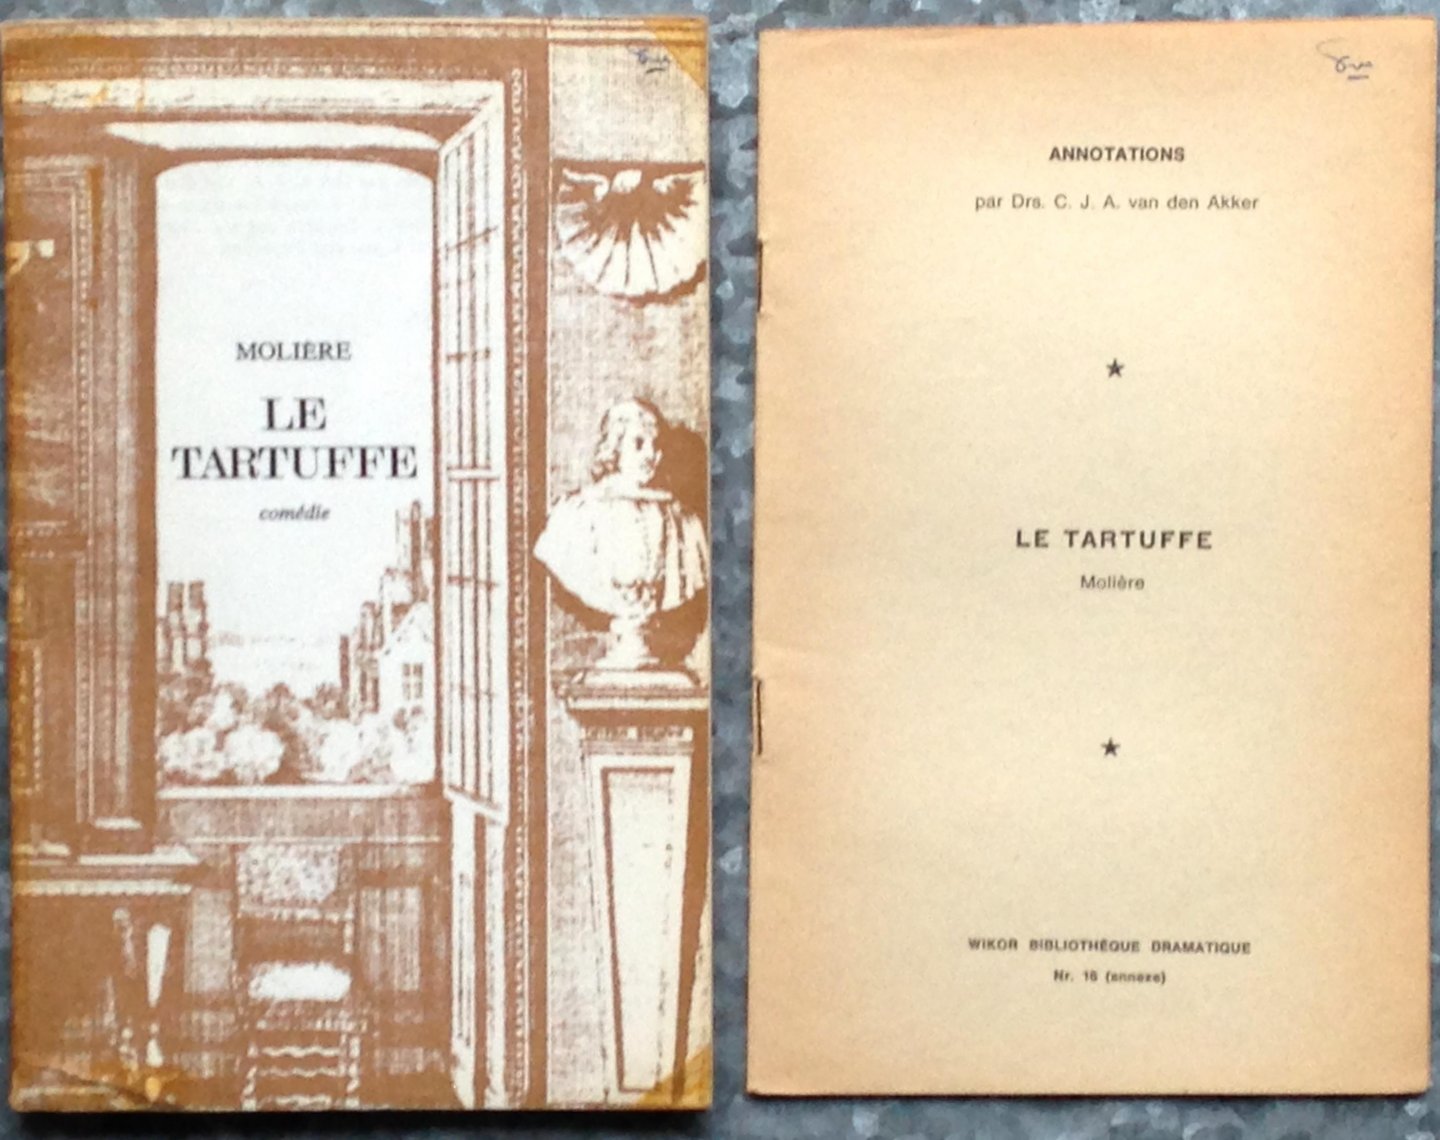 Moliere - Le Tartuffe + Annotations